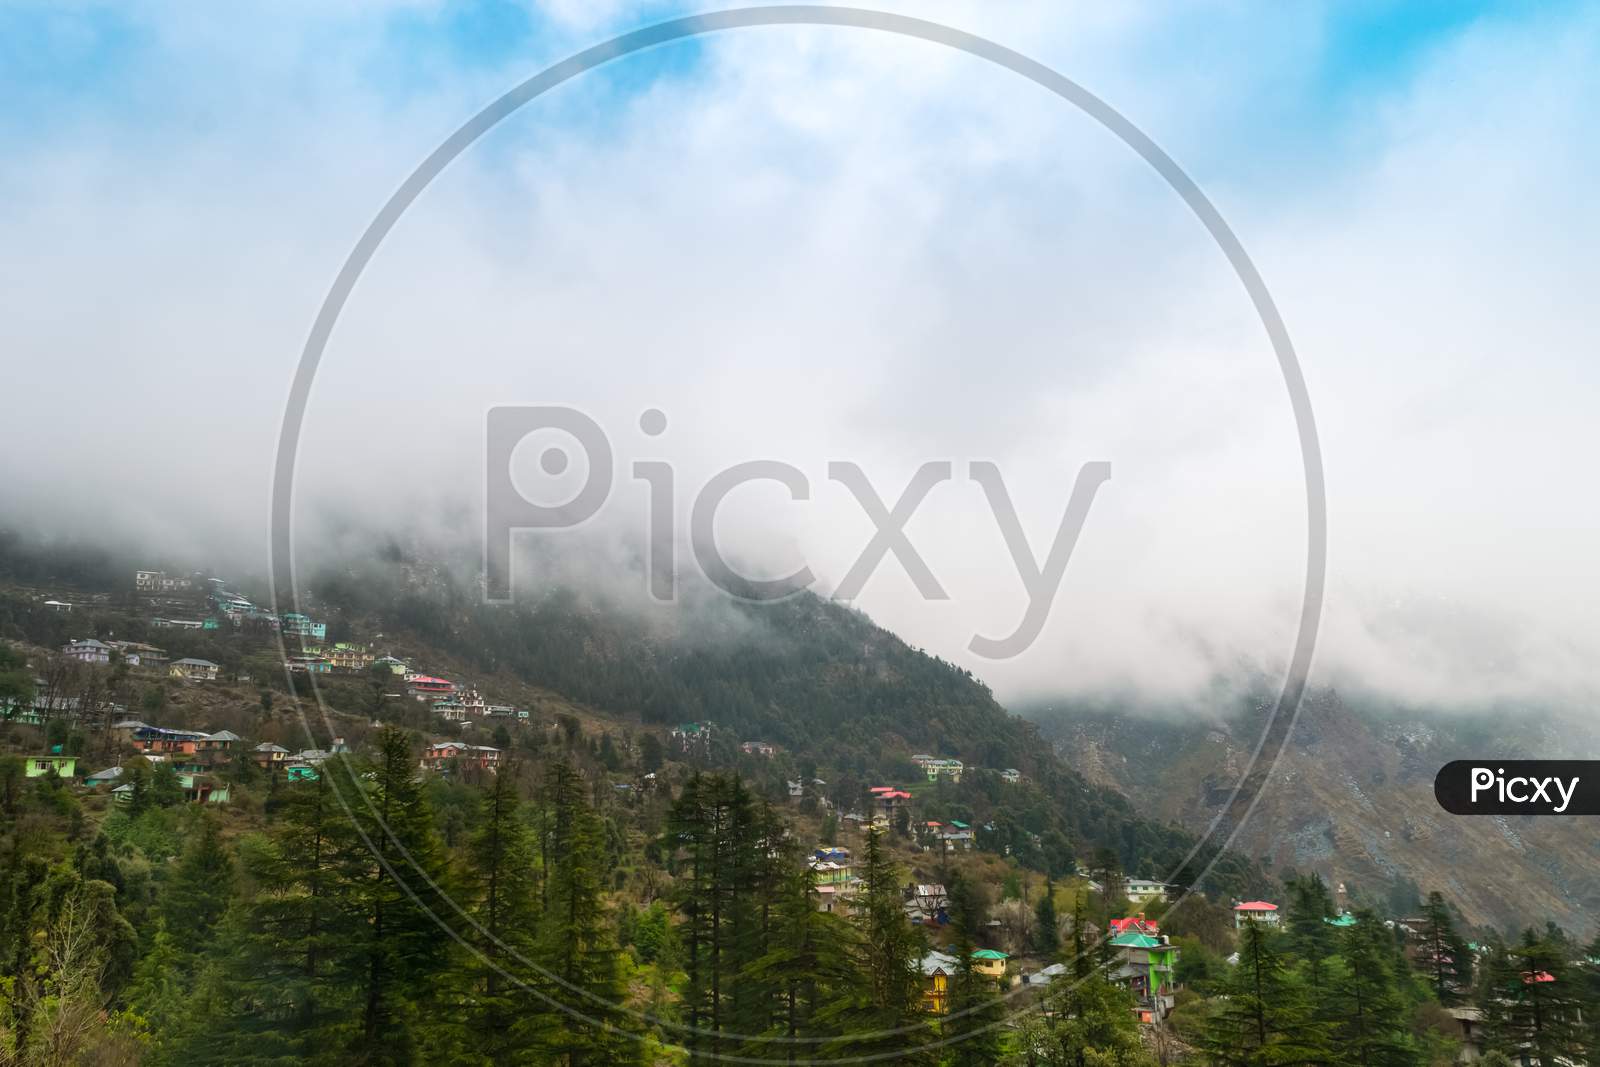 From The Hotel'S Balcony, Huge Clouds Cover The Himalayan Mountains And The Blue Sky At Dharamsala In Himachal Pradesh.